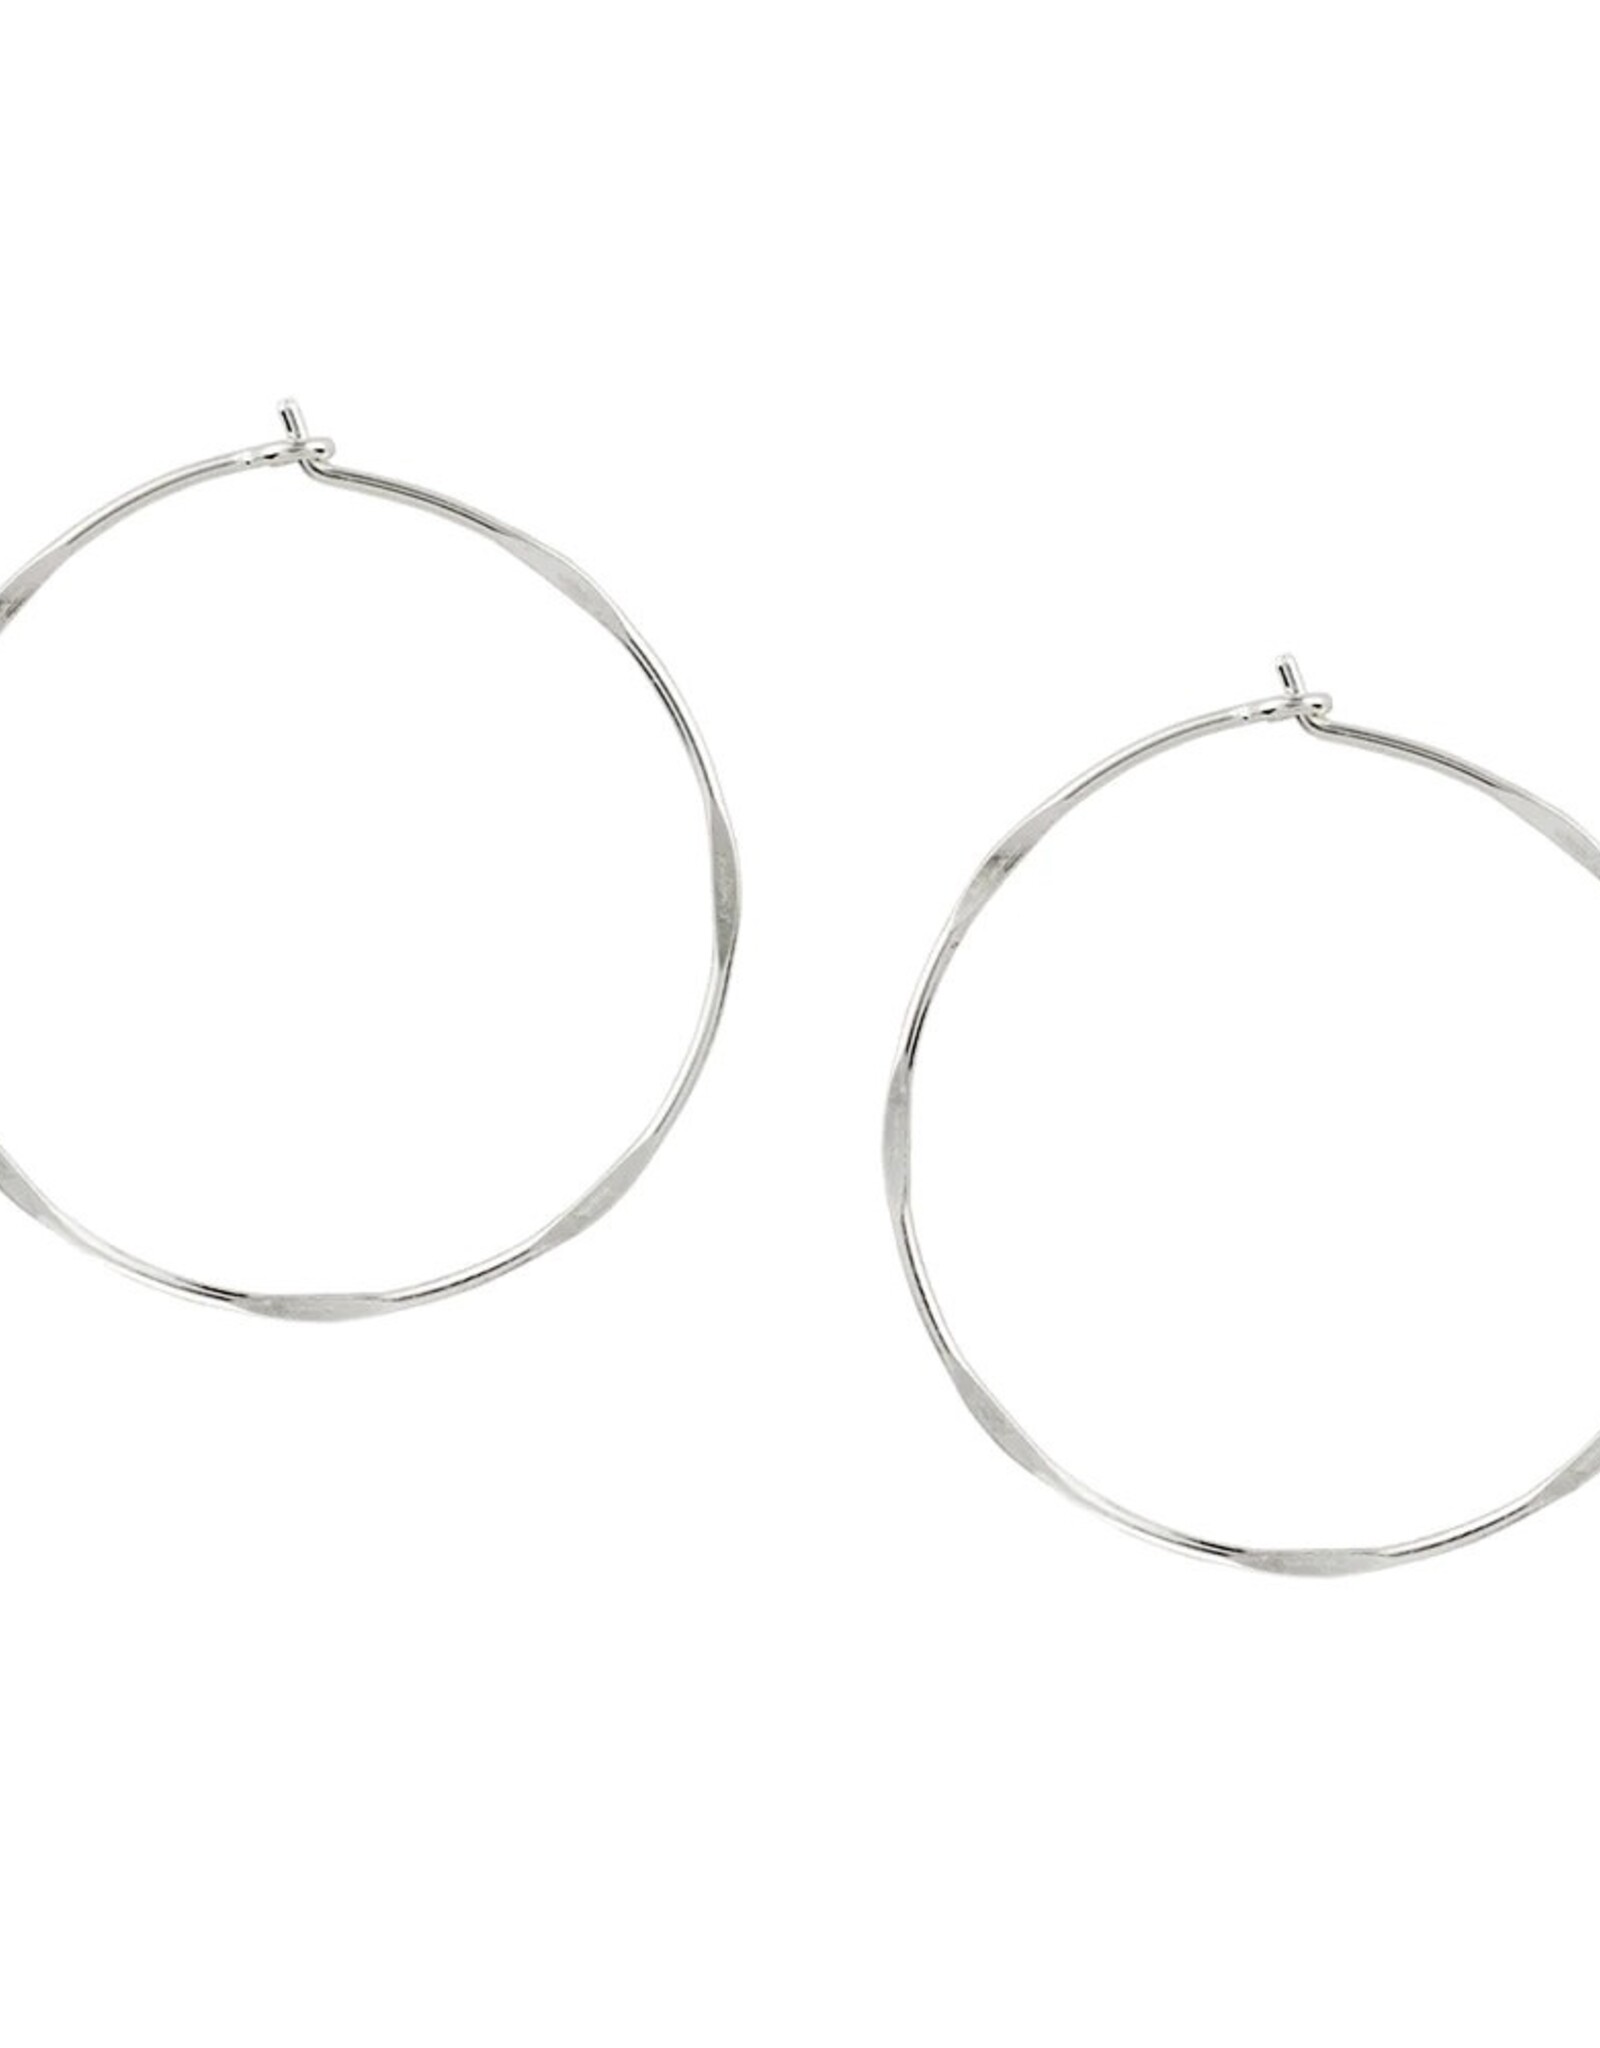 Good Collective 20mm TWISTED HAMMERED HOOP EARRING - Tomas